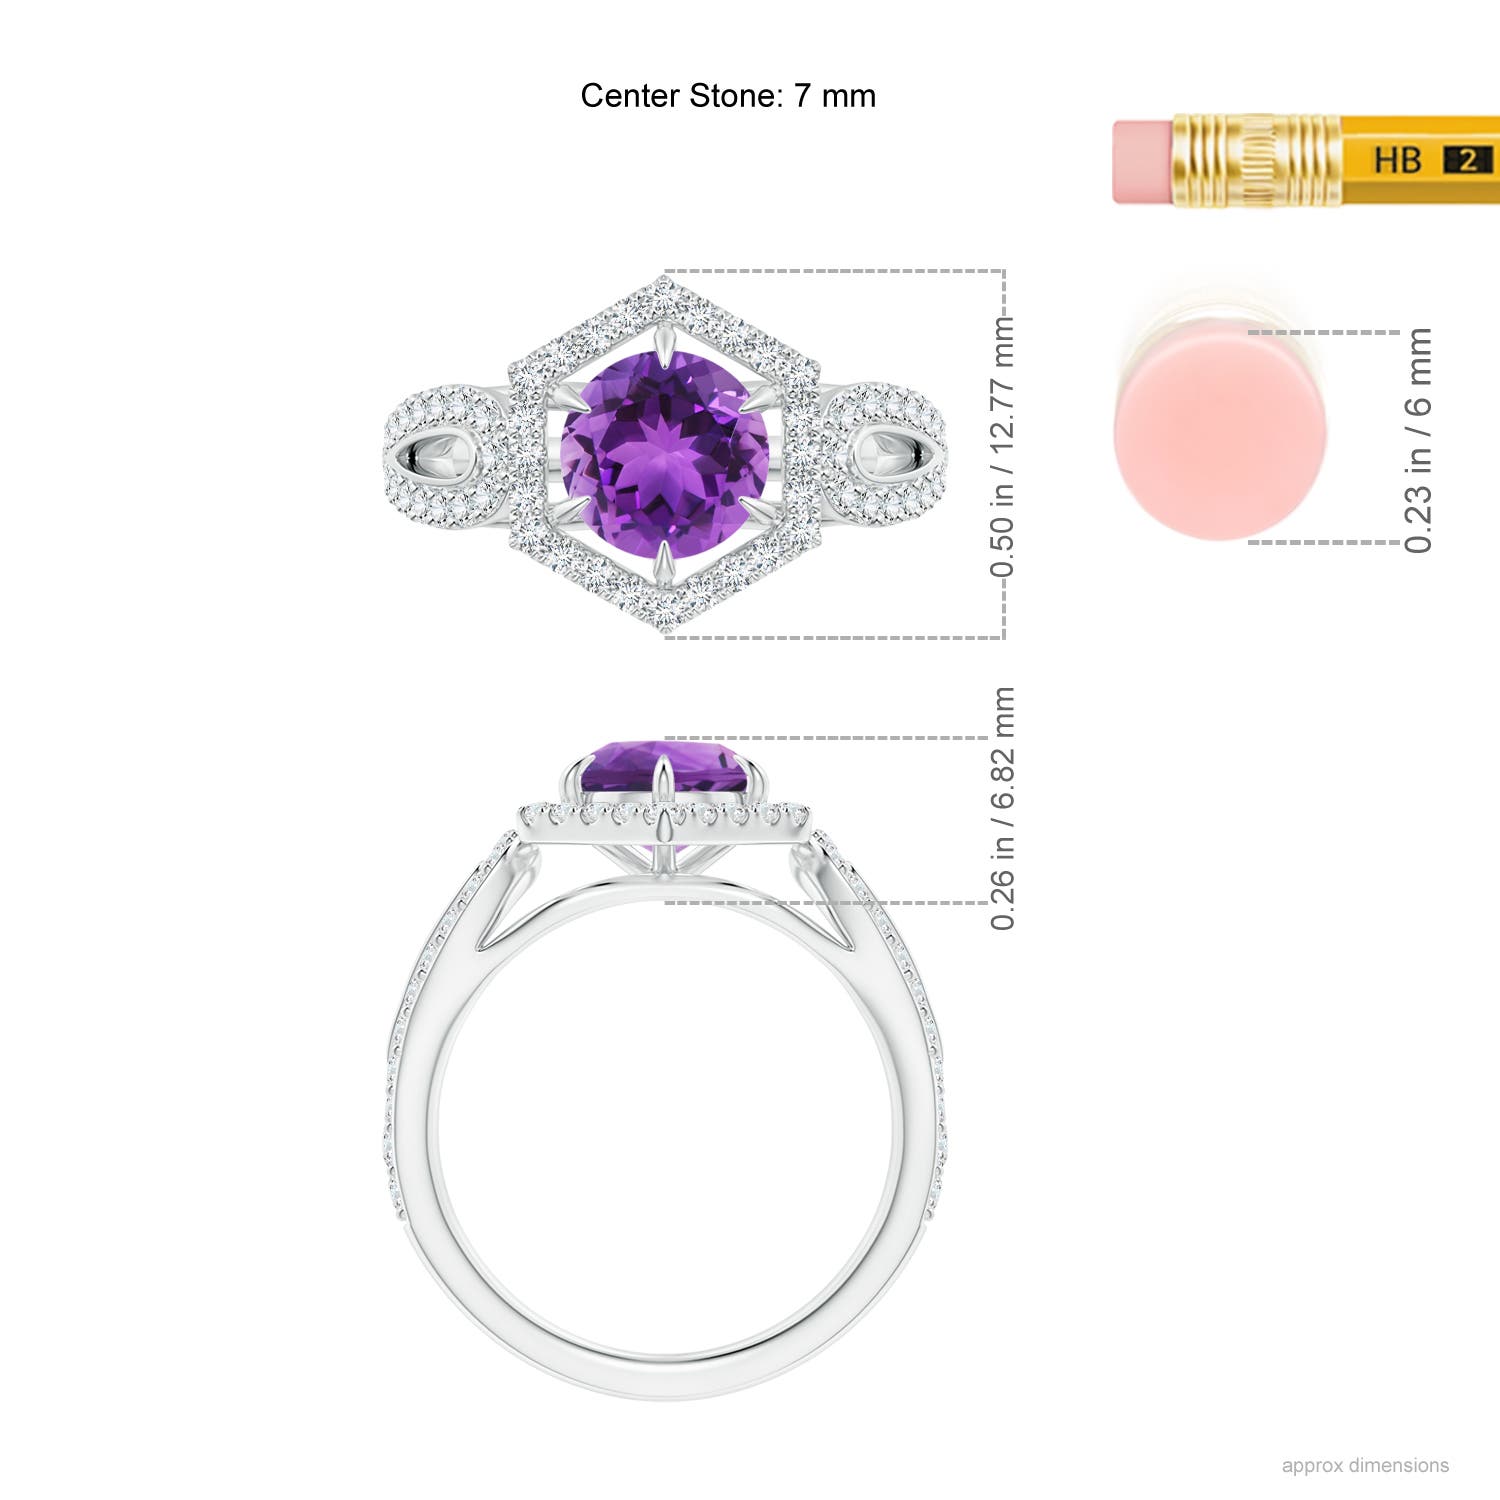 AAA - Amethyst / 1.75 CT / 14 KT White Gold